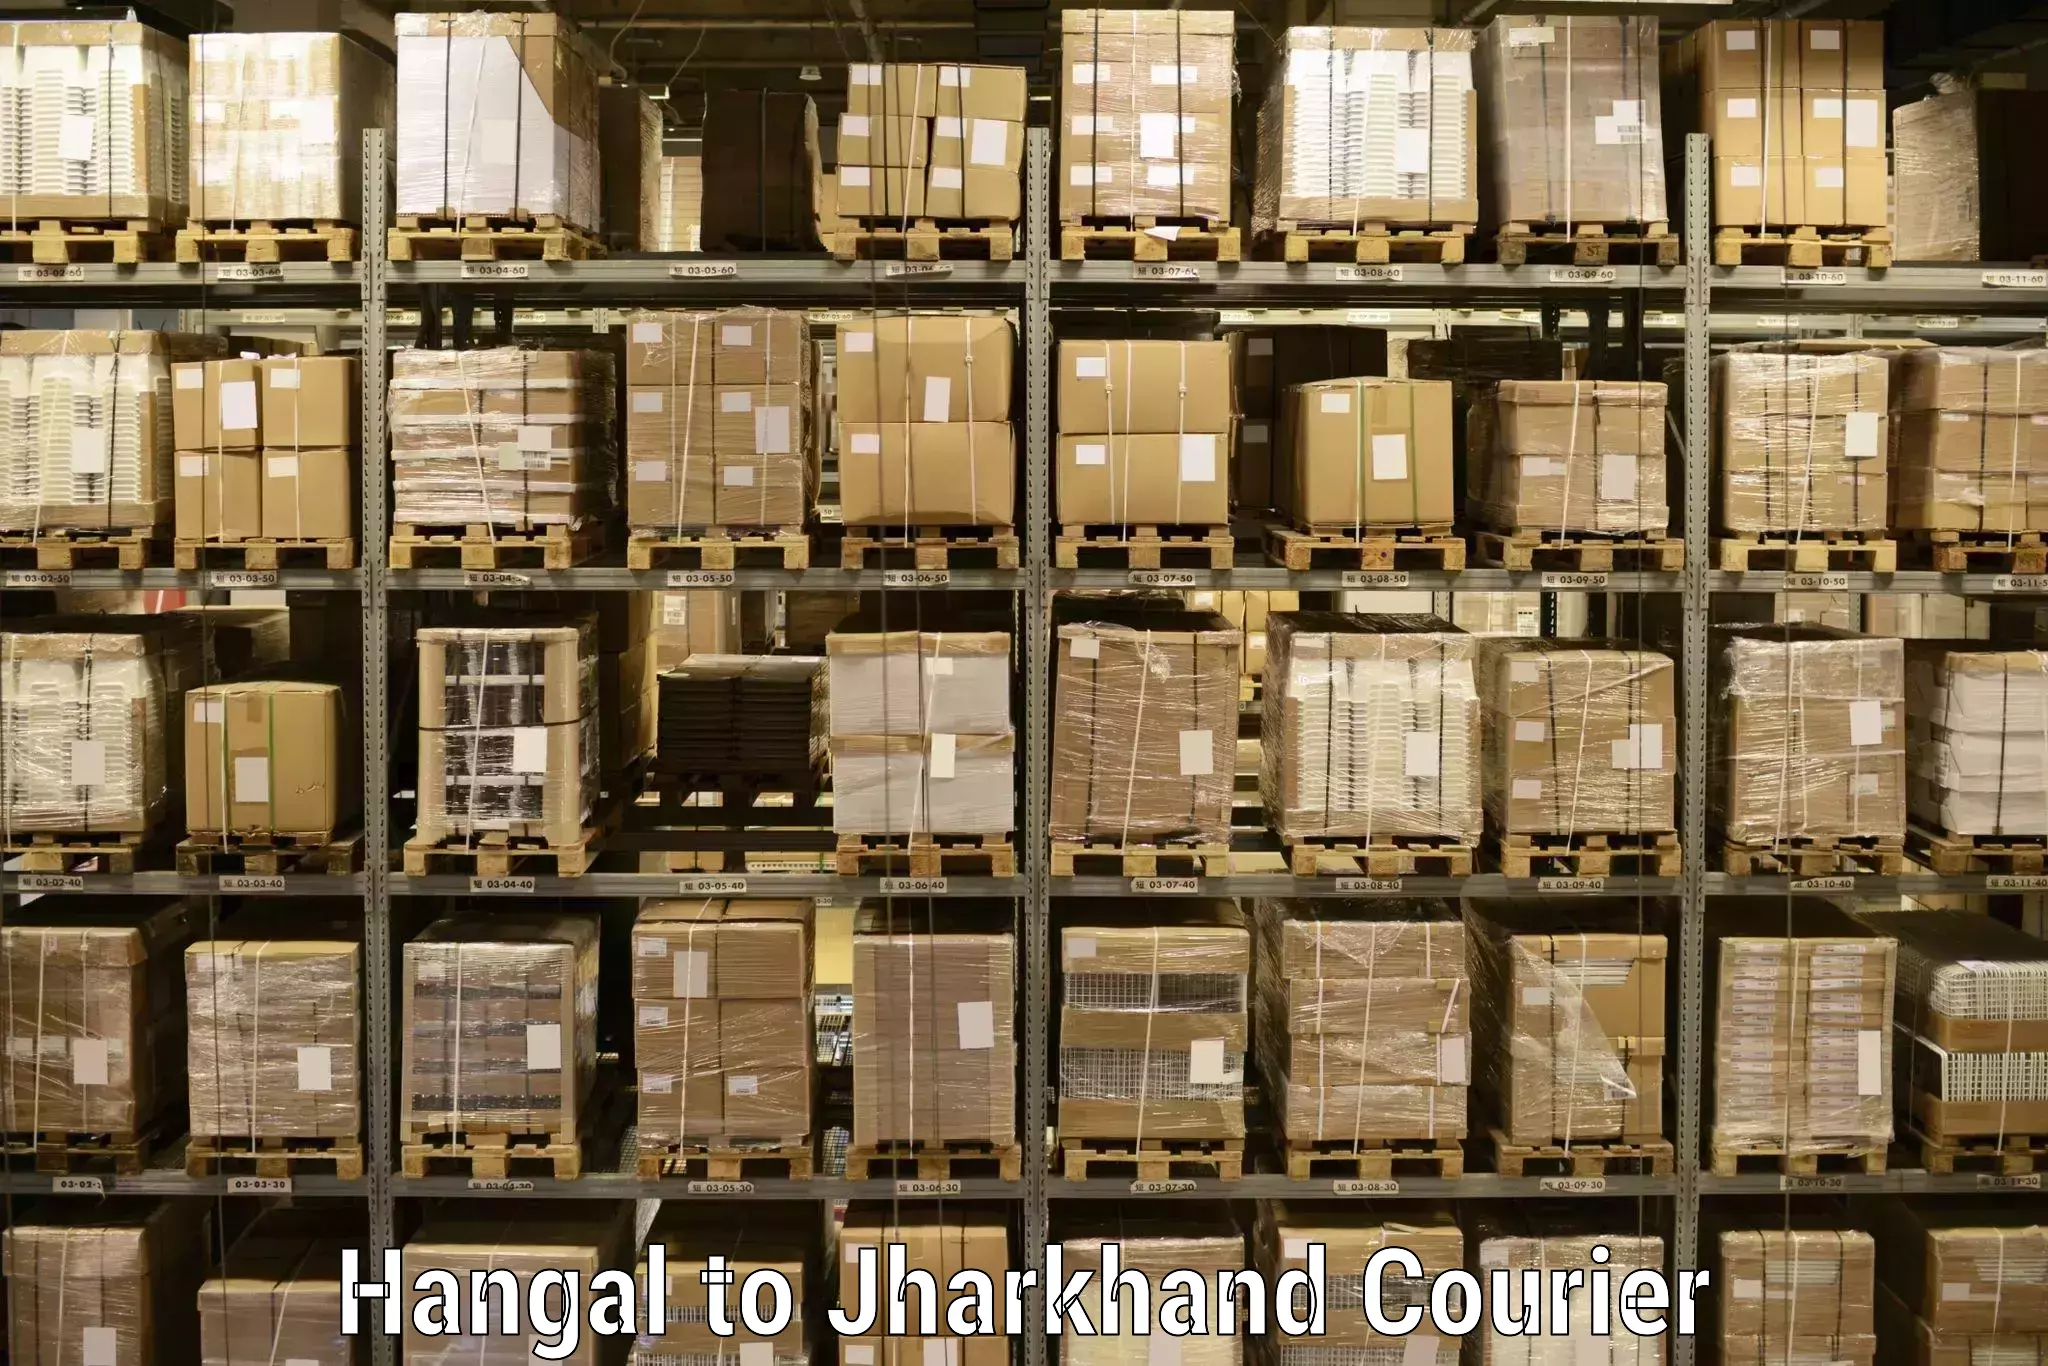 Advanced shipping technology Hangal to Jamshedpur